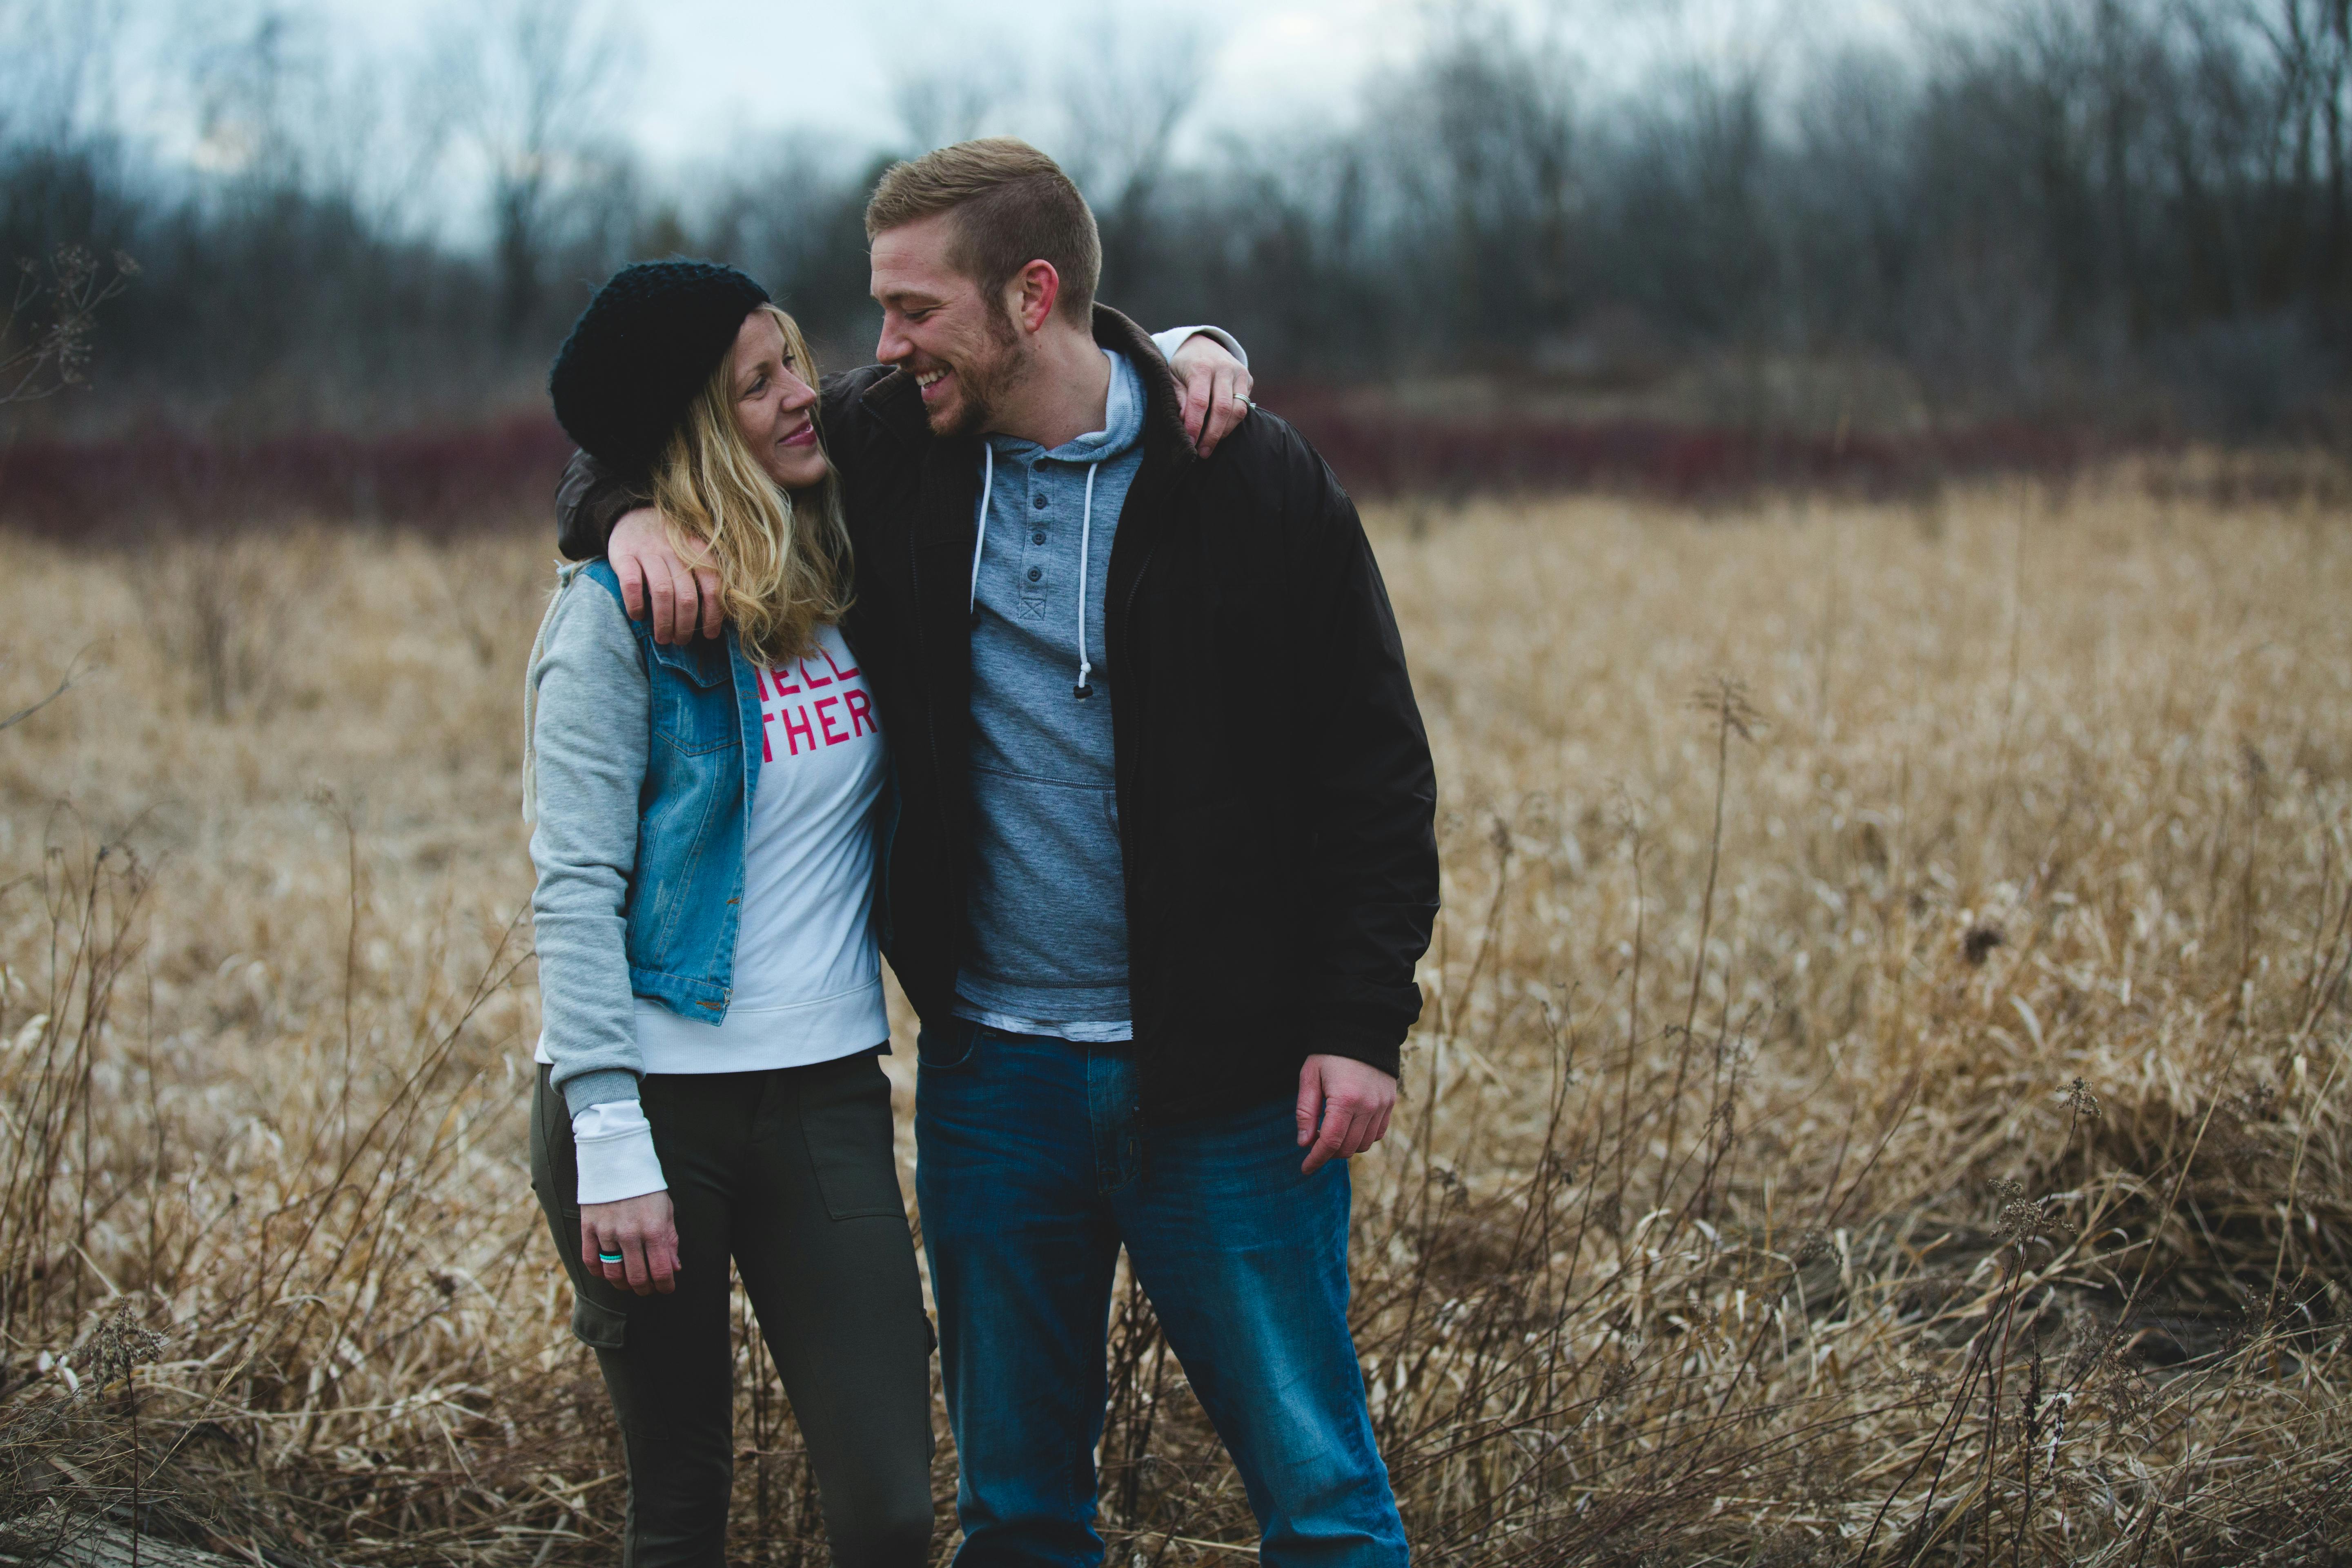 A woman and a man smiled at each other near the field. | Photo: Pexels